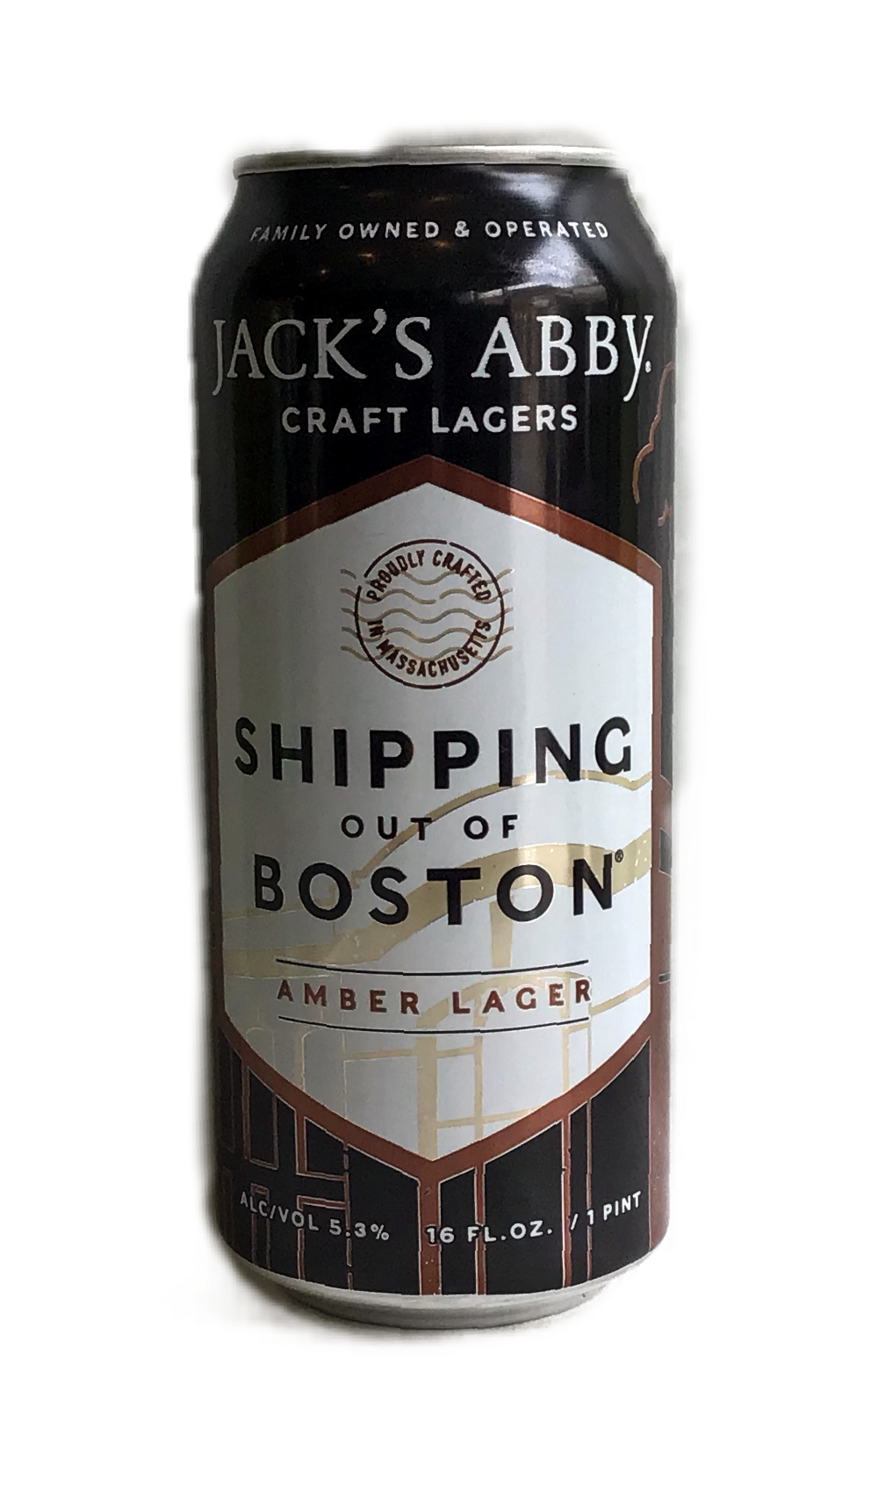 Jacks Abby Shipping Out of Boston